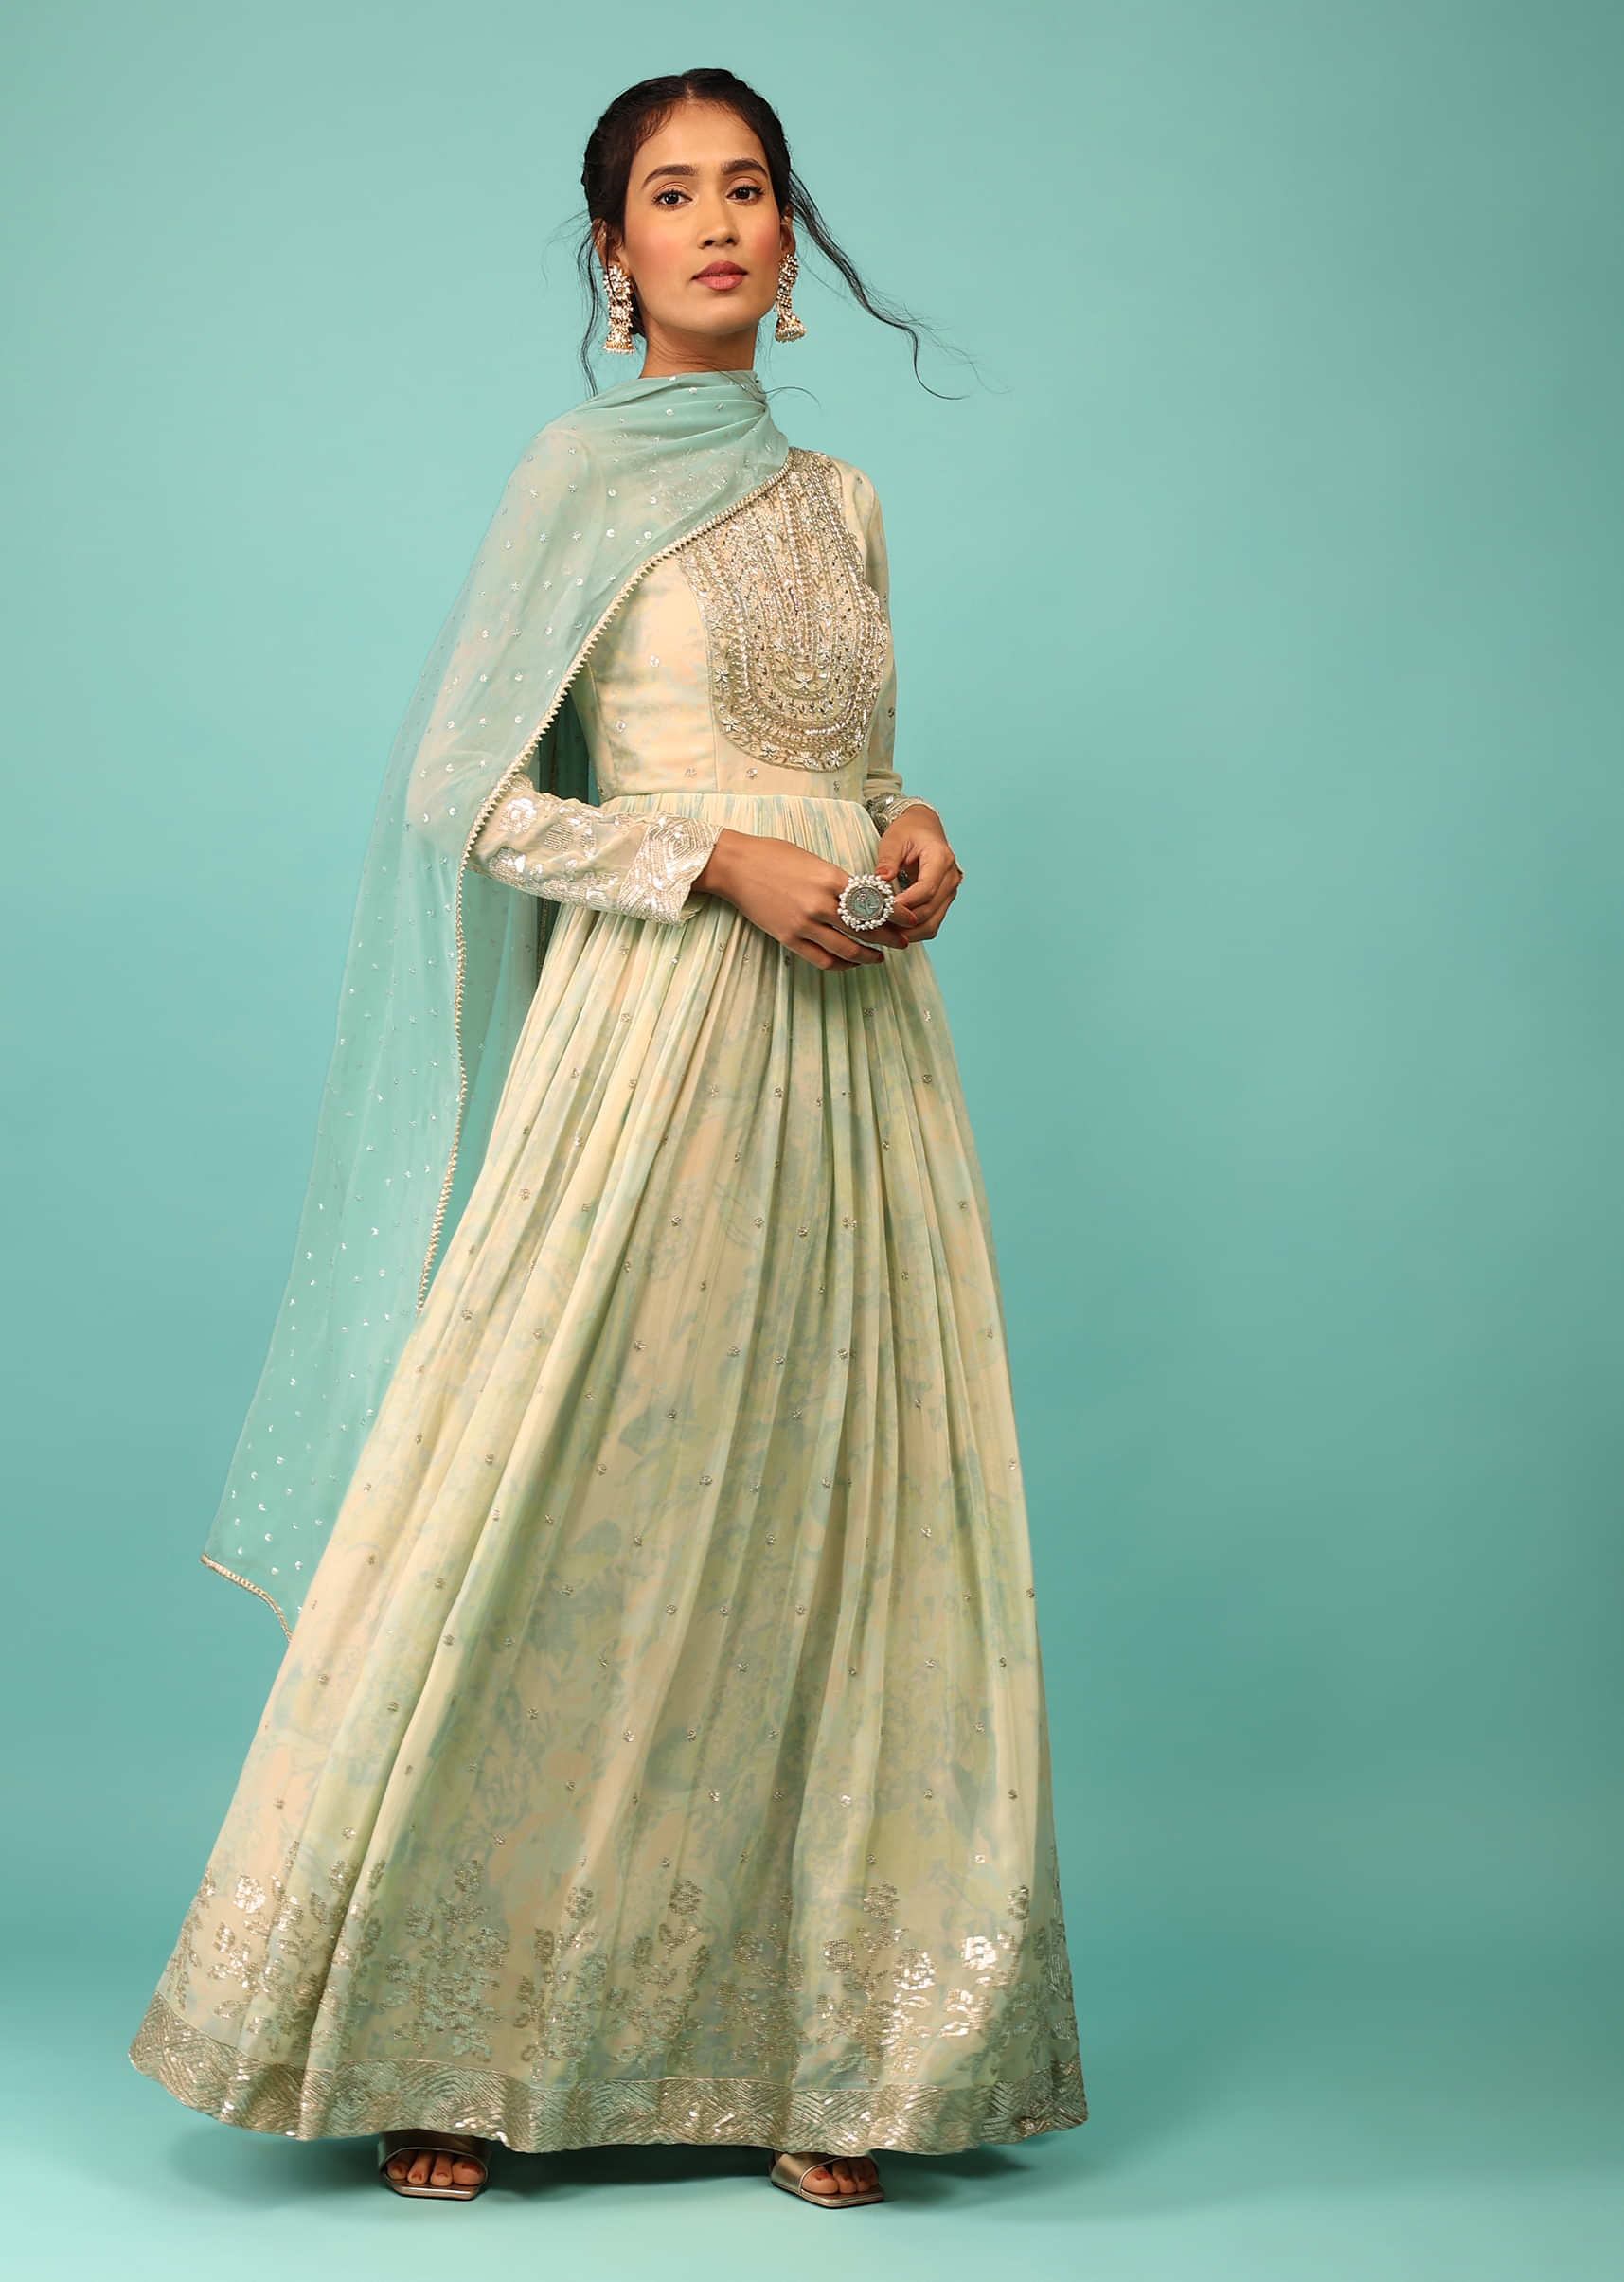 Multicoloured Anarkali Suit In Georgette With Floral Print, Embroidery And A Pastel Green Dupatta